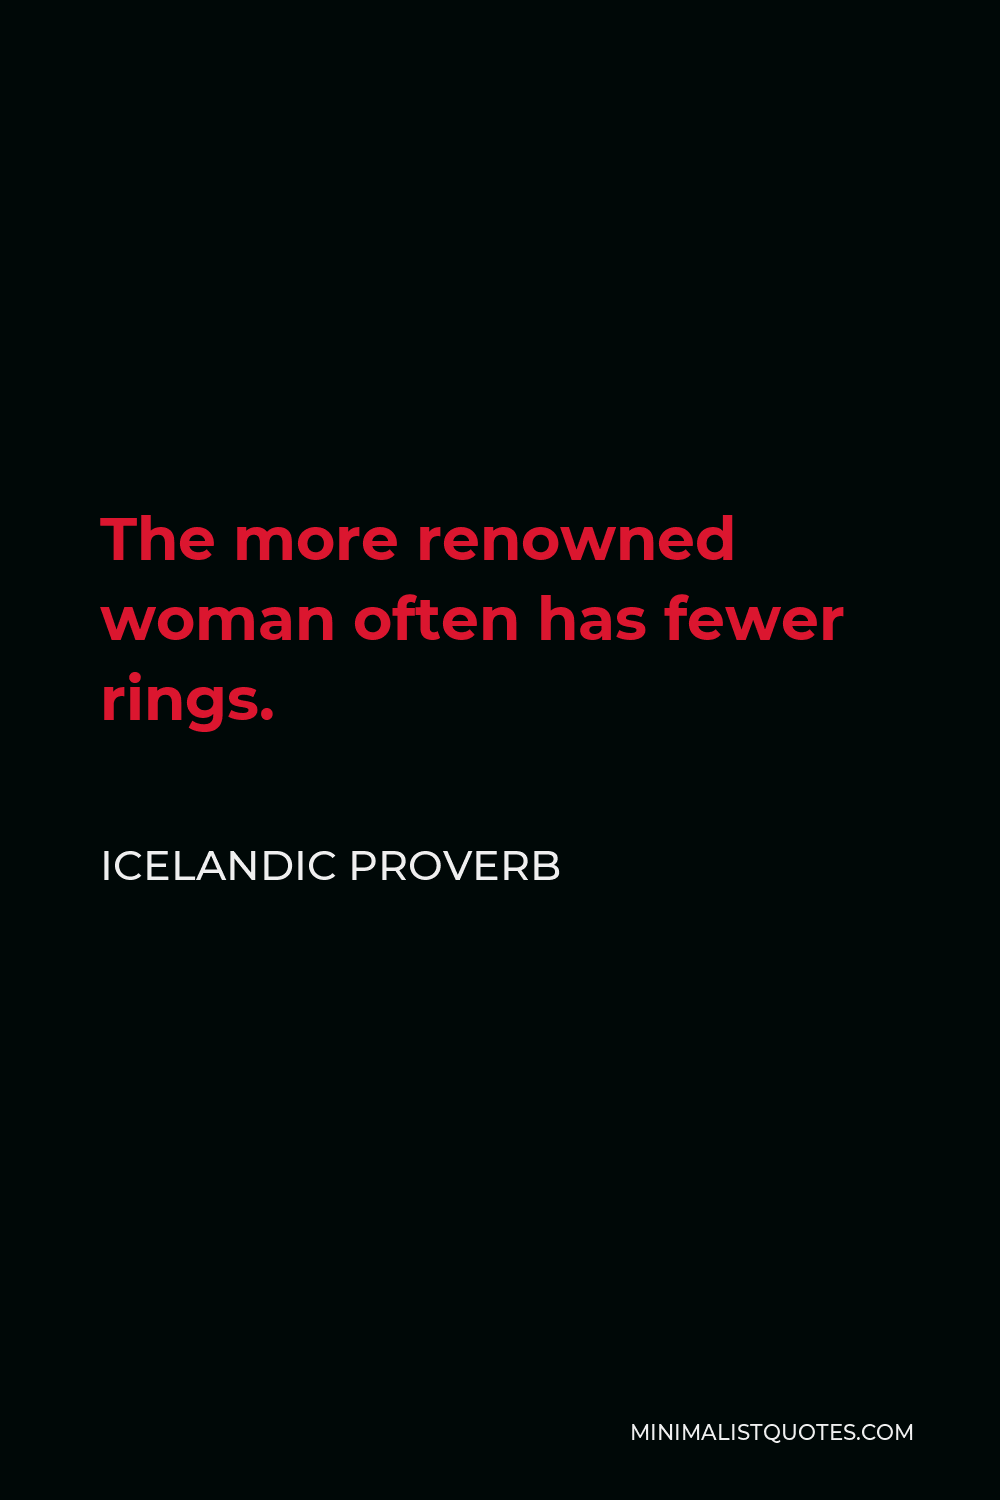 Icelandic Proverb Quote - The more renowned woman often has fewer rings.